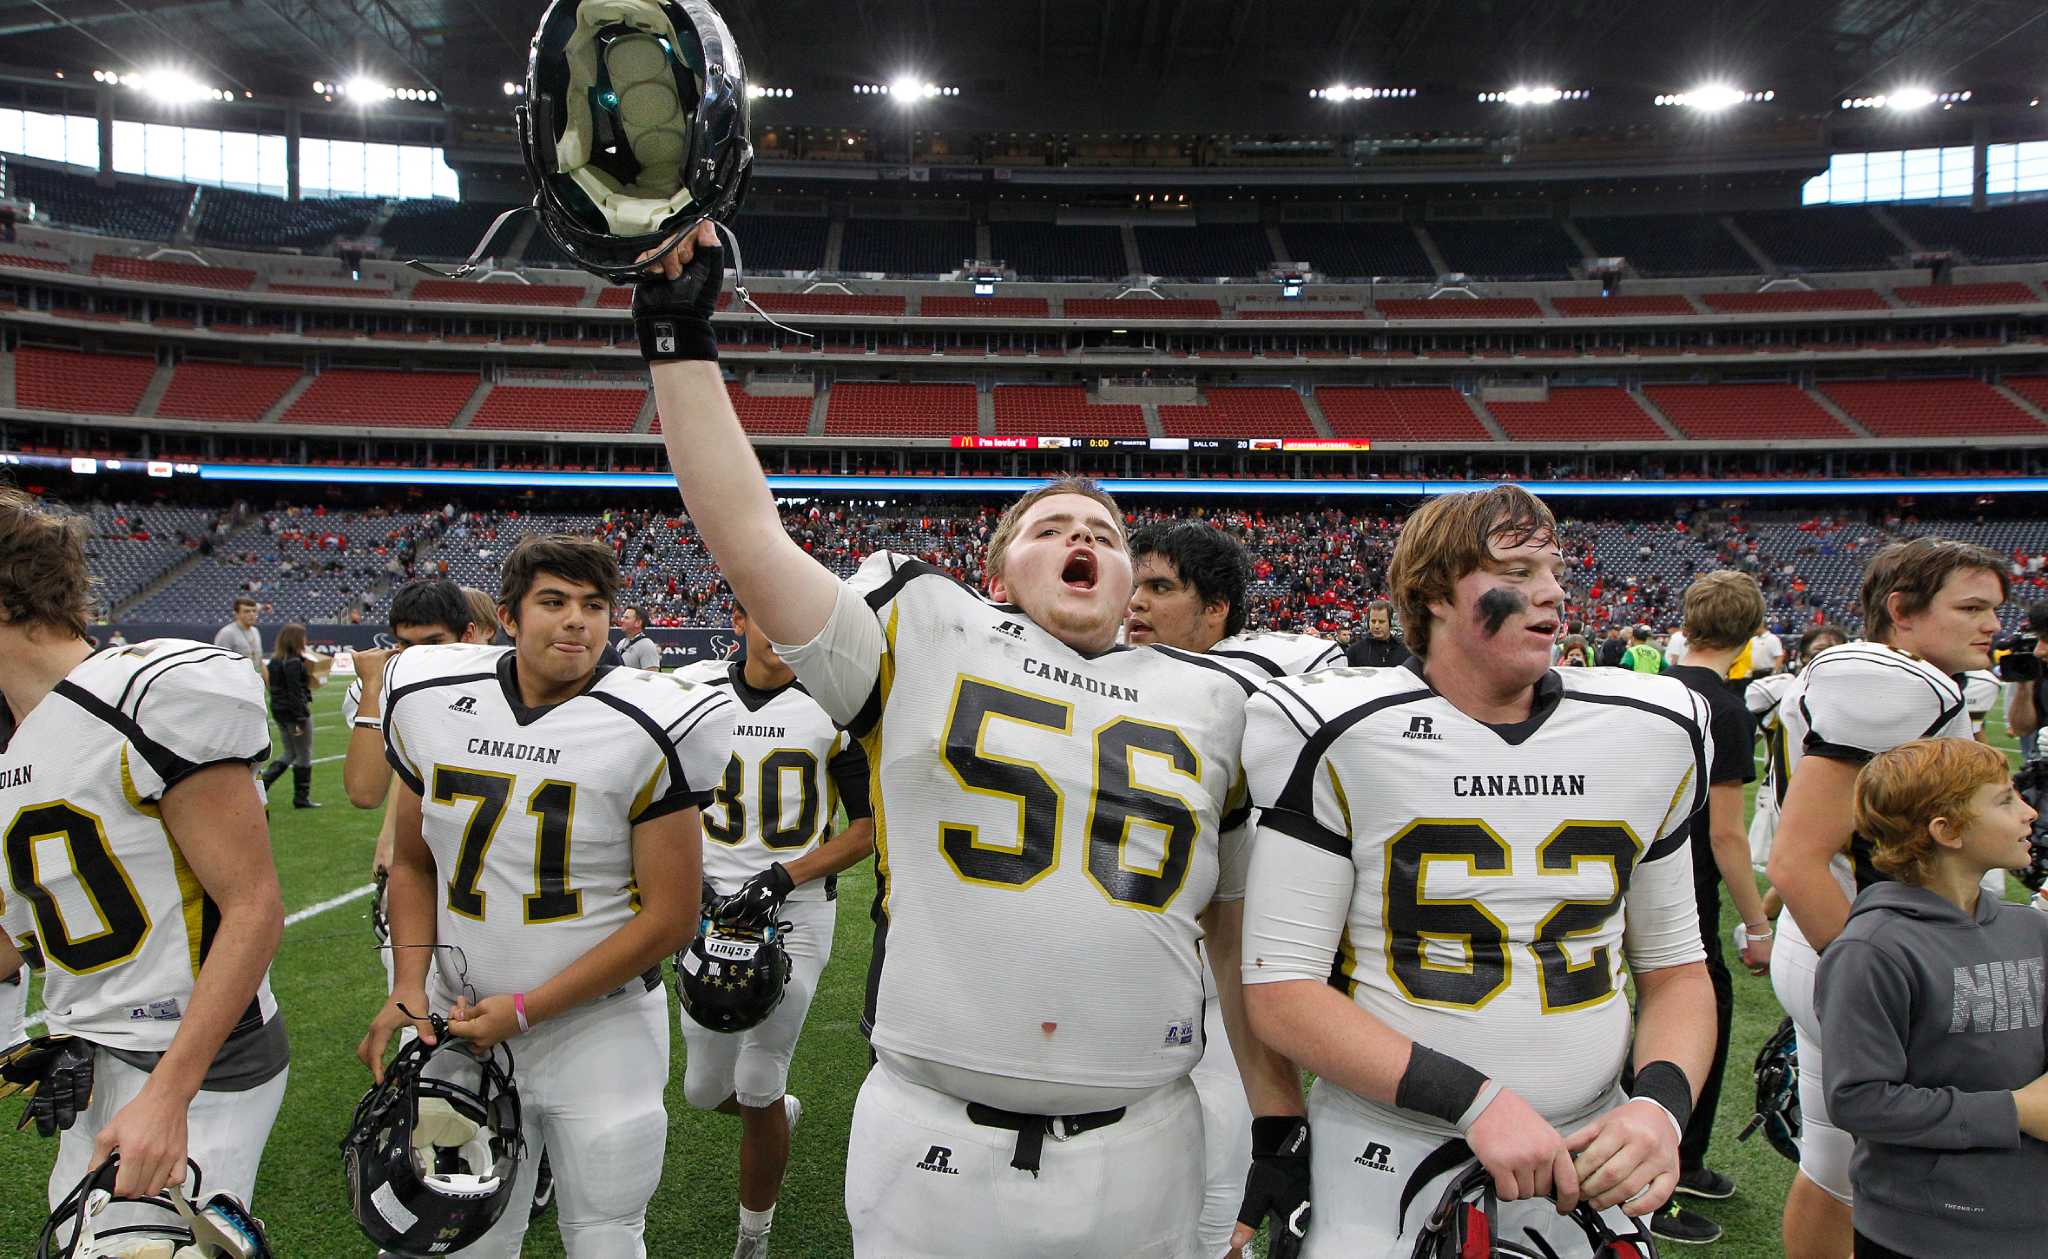 Day 1 2015 UIL state football championships